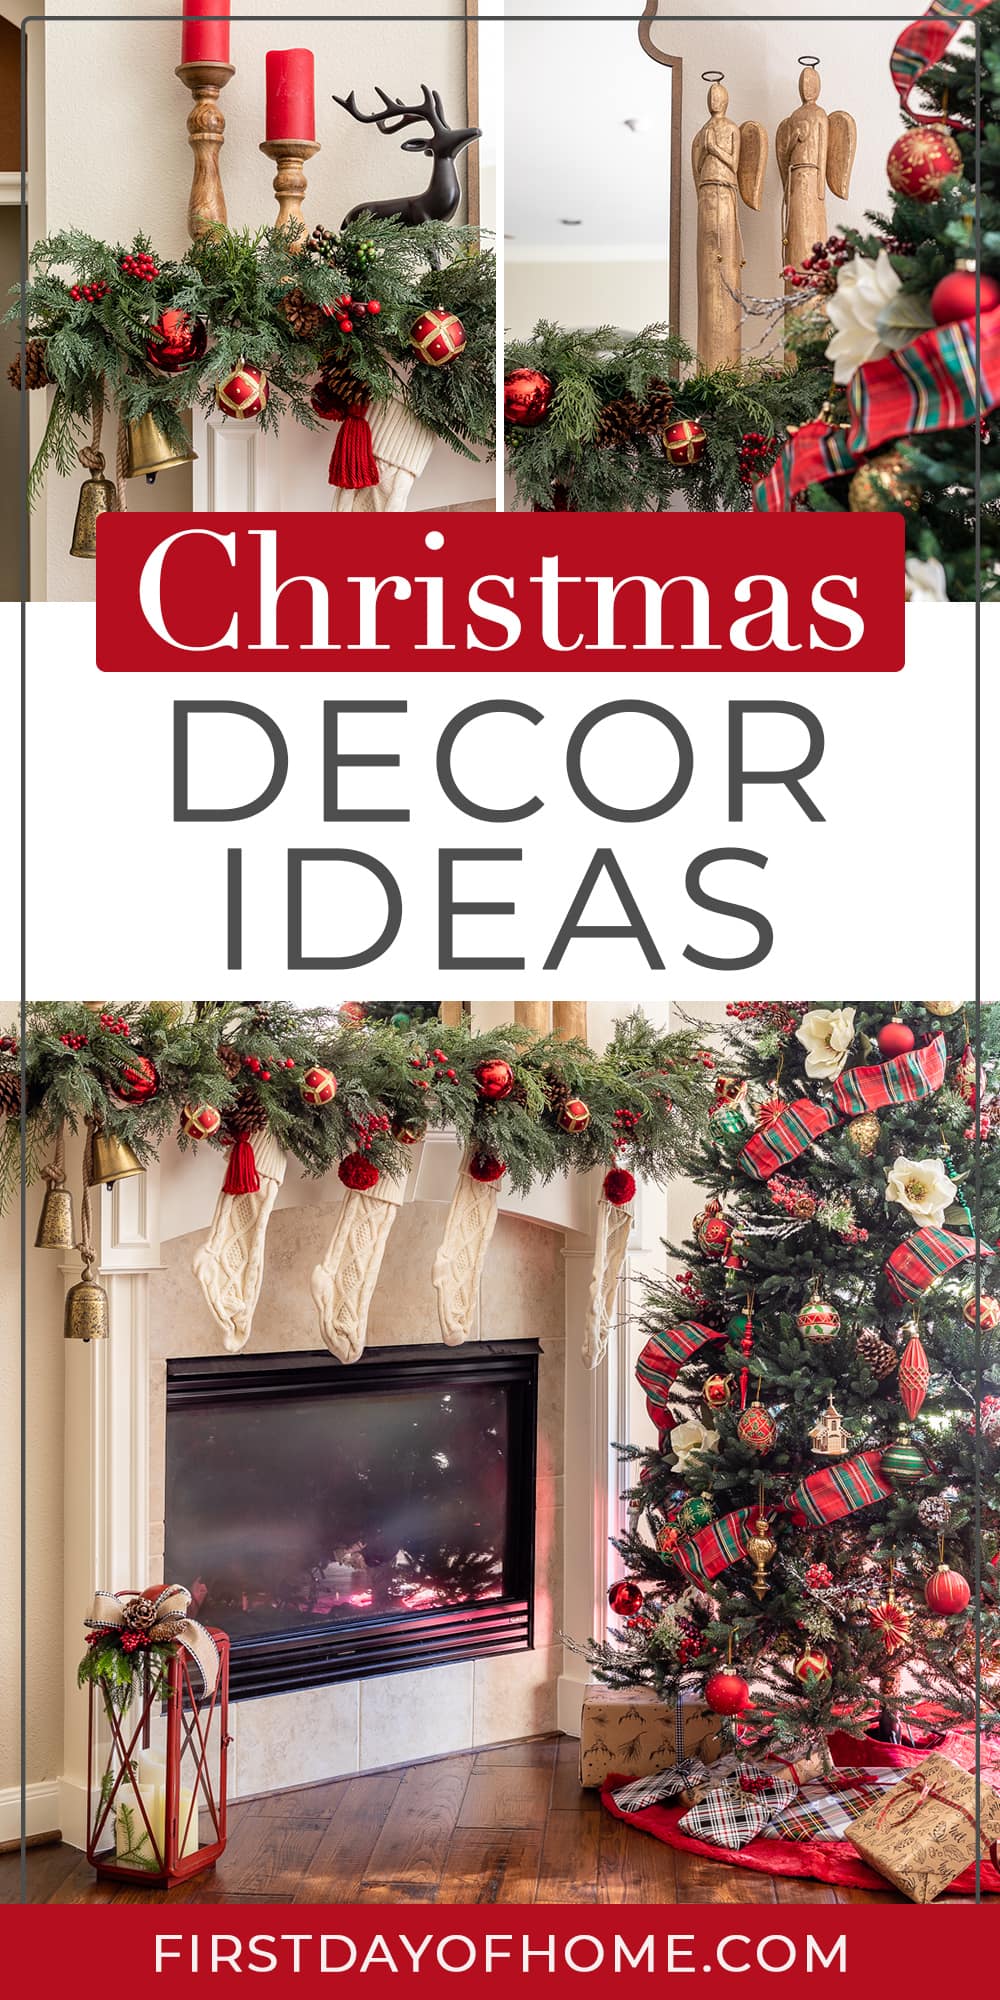 Best Holiday Decorating Tips | Artificial Trees & More | HomeGoods